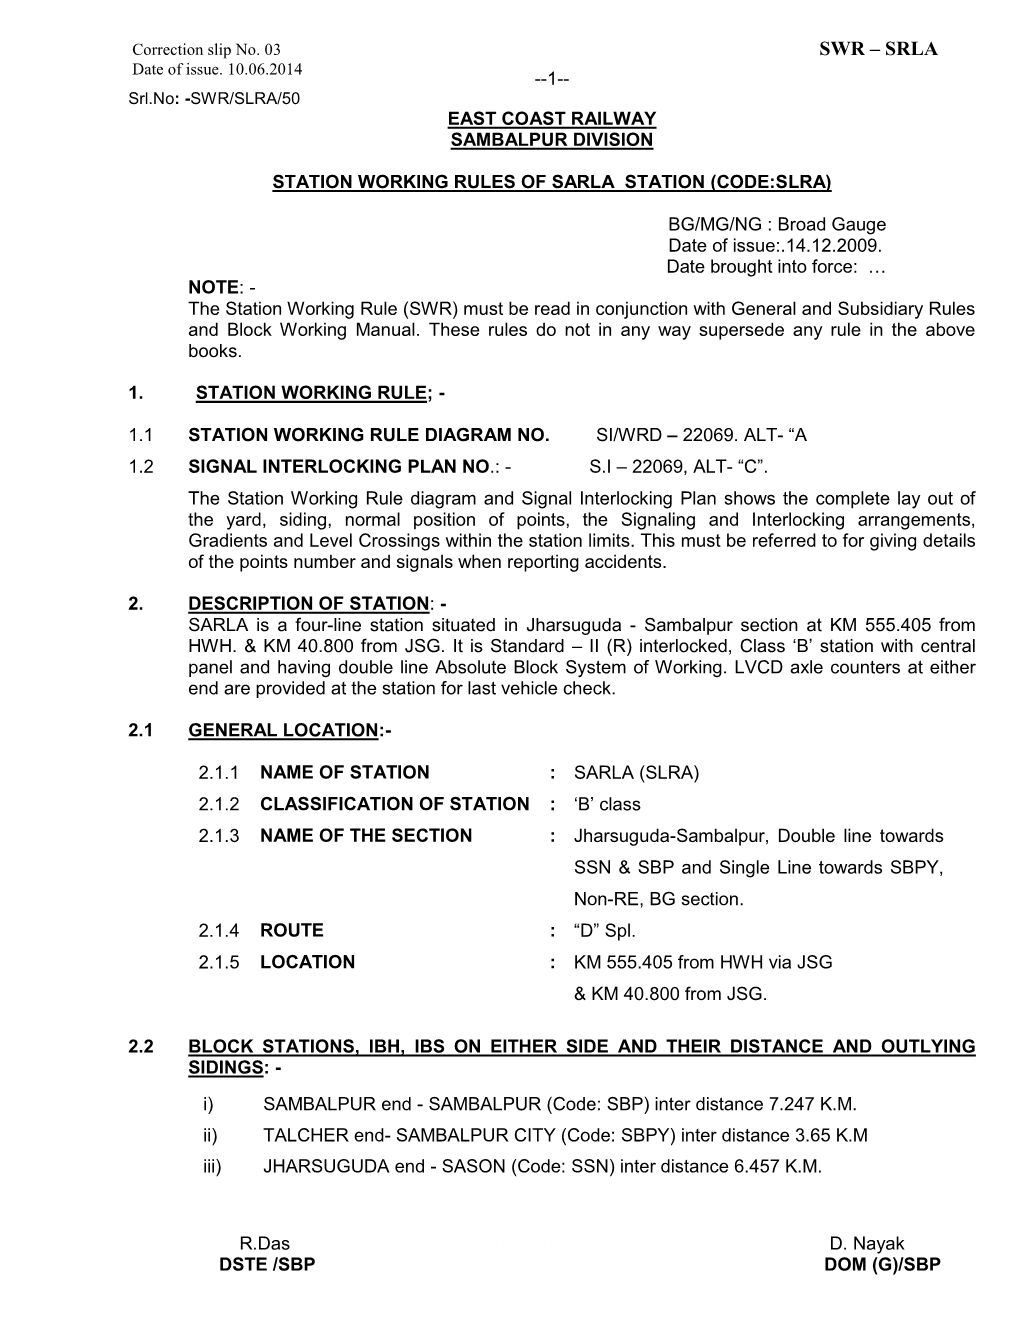 Station Working Rules of Sarla Station (Code:Slra)